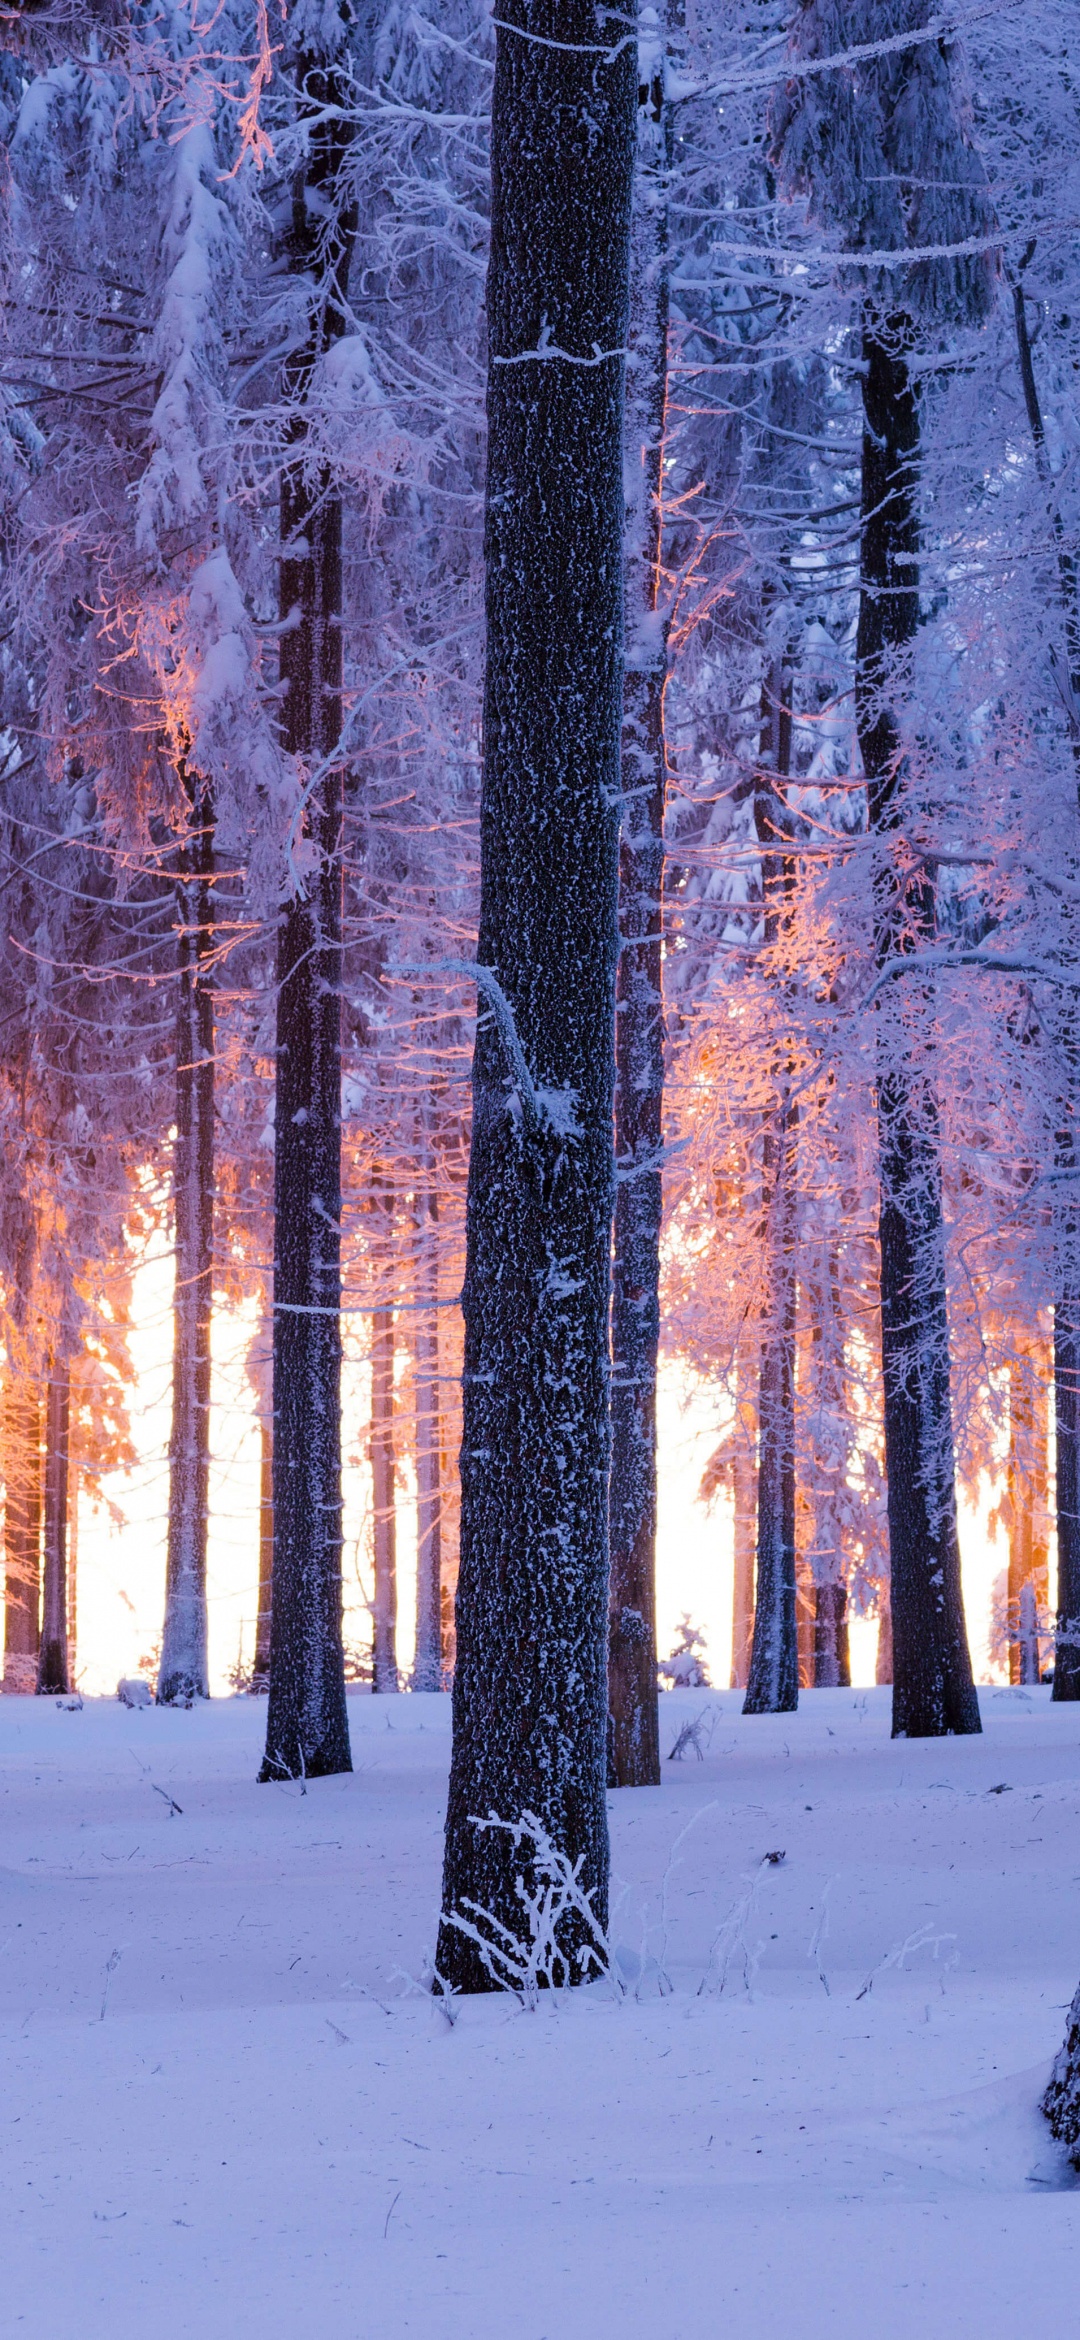 Forest Wallpaper 4K, Winter, Snowy, Nature